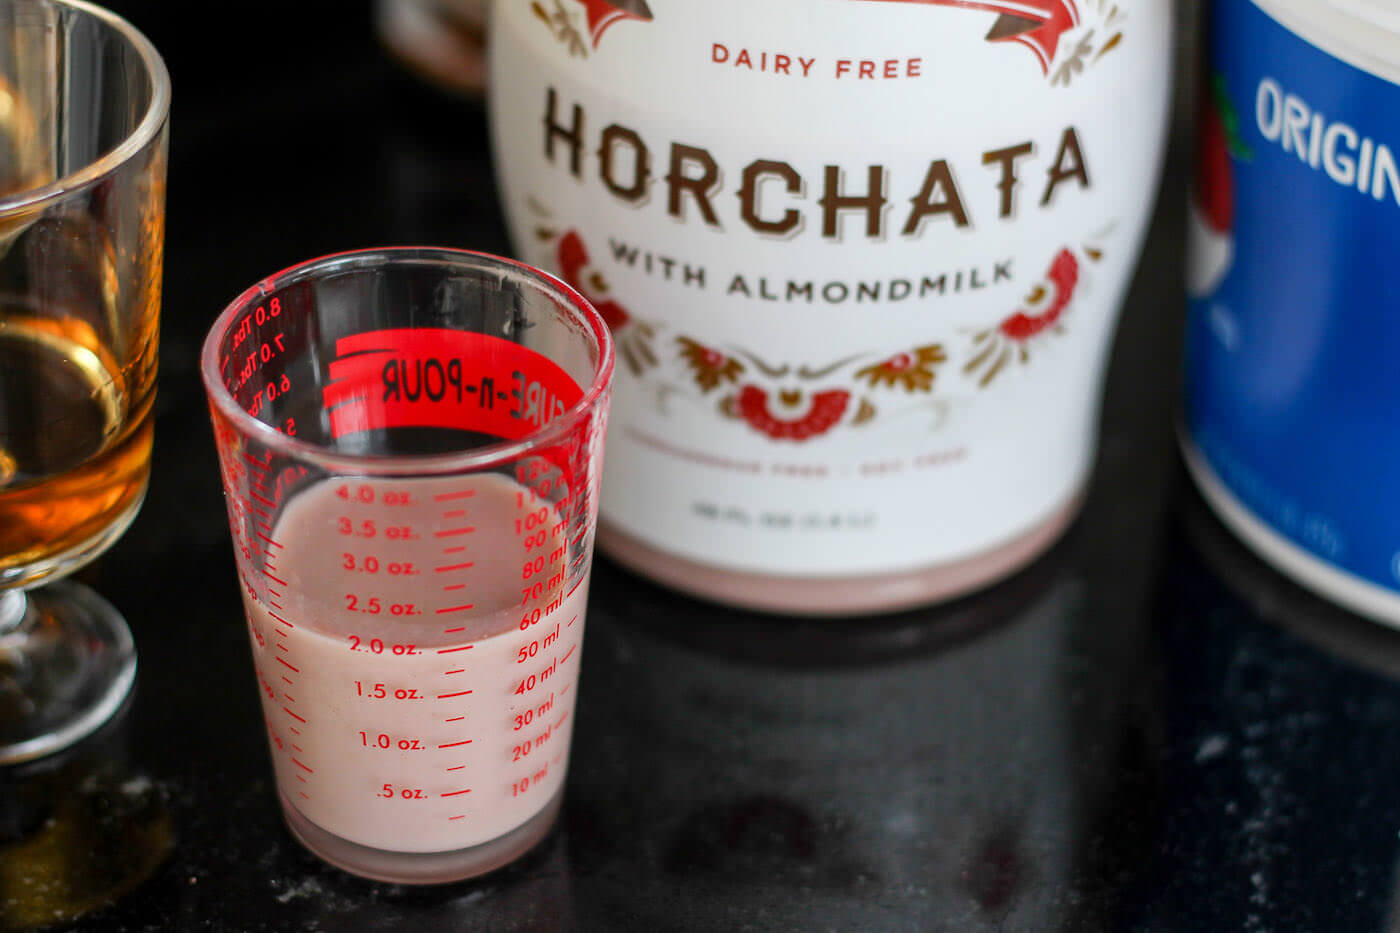 Measuring out the horchata